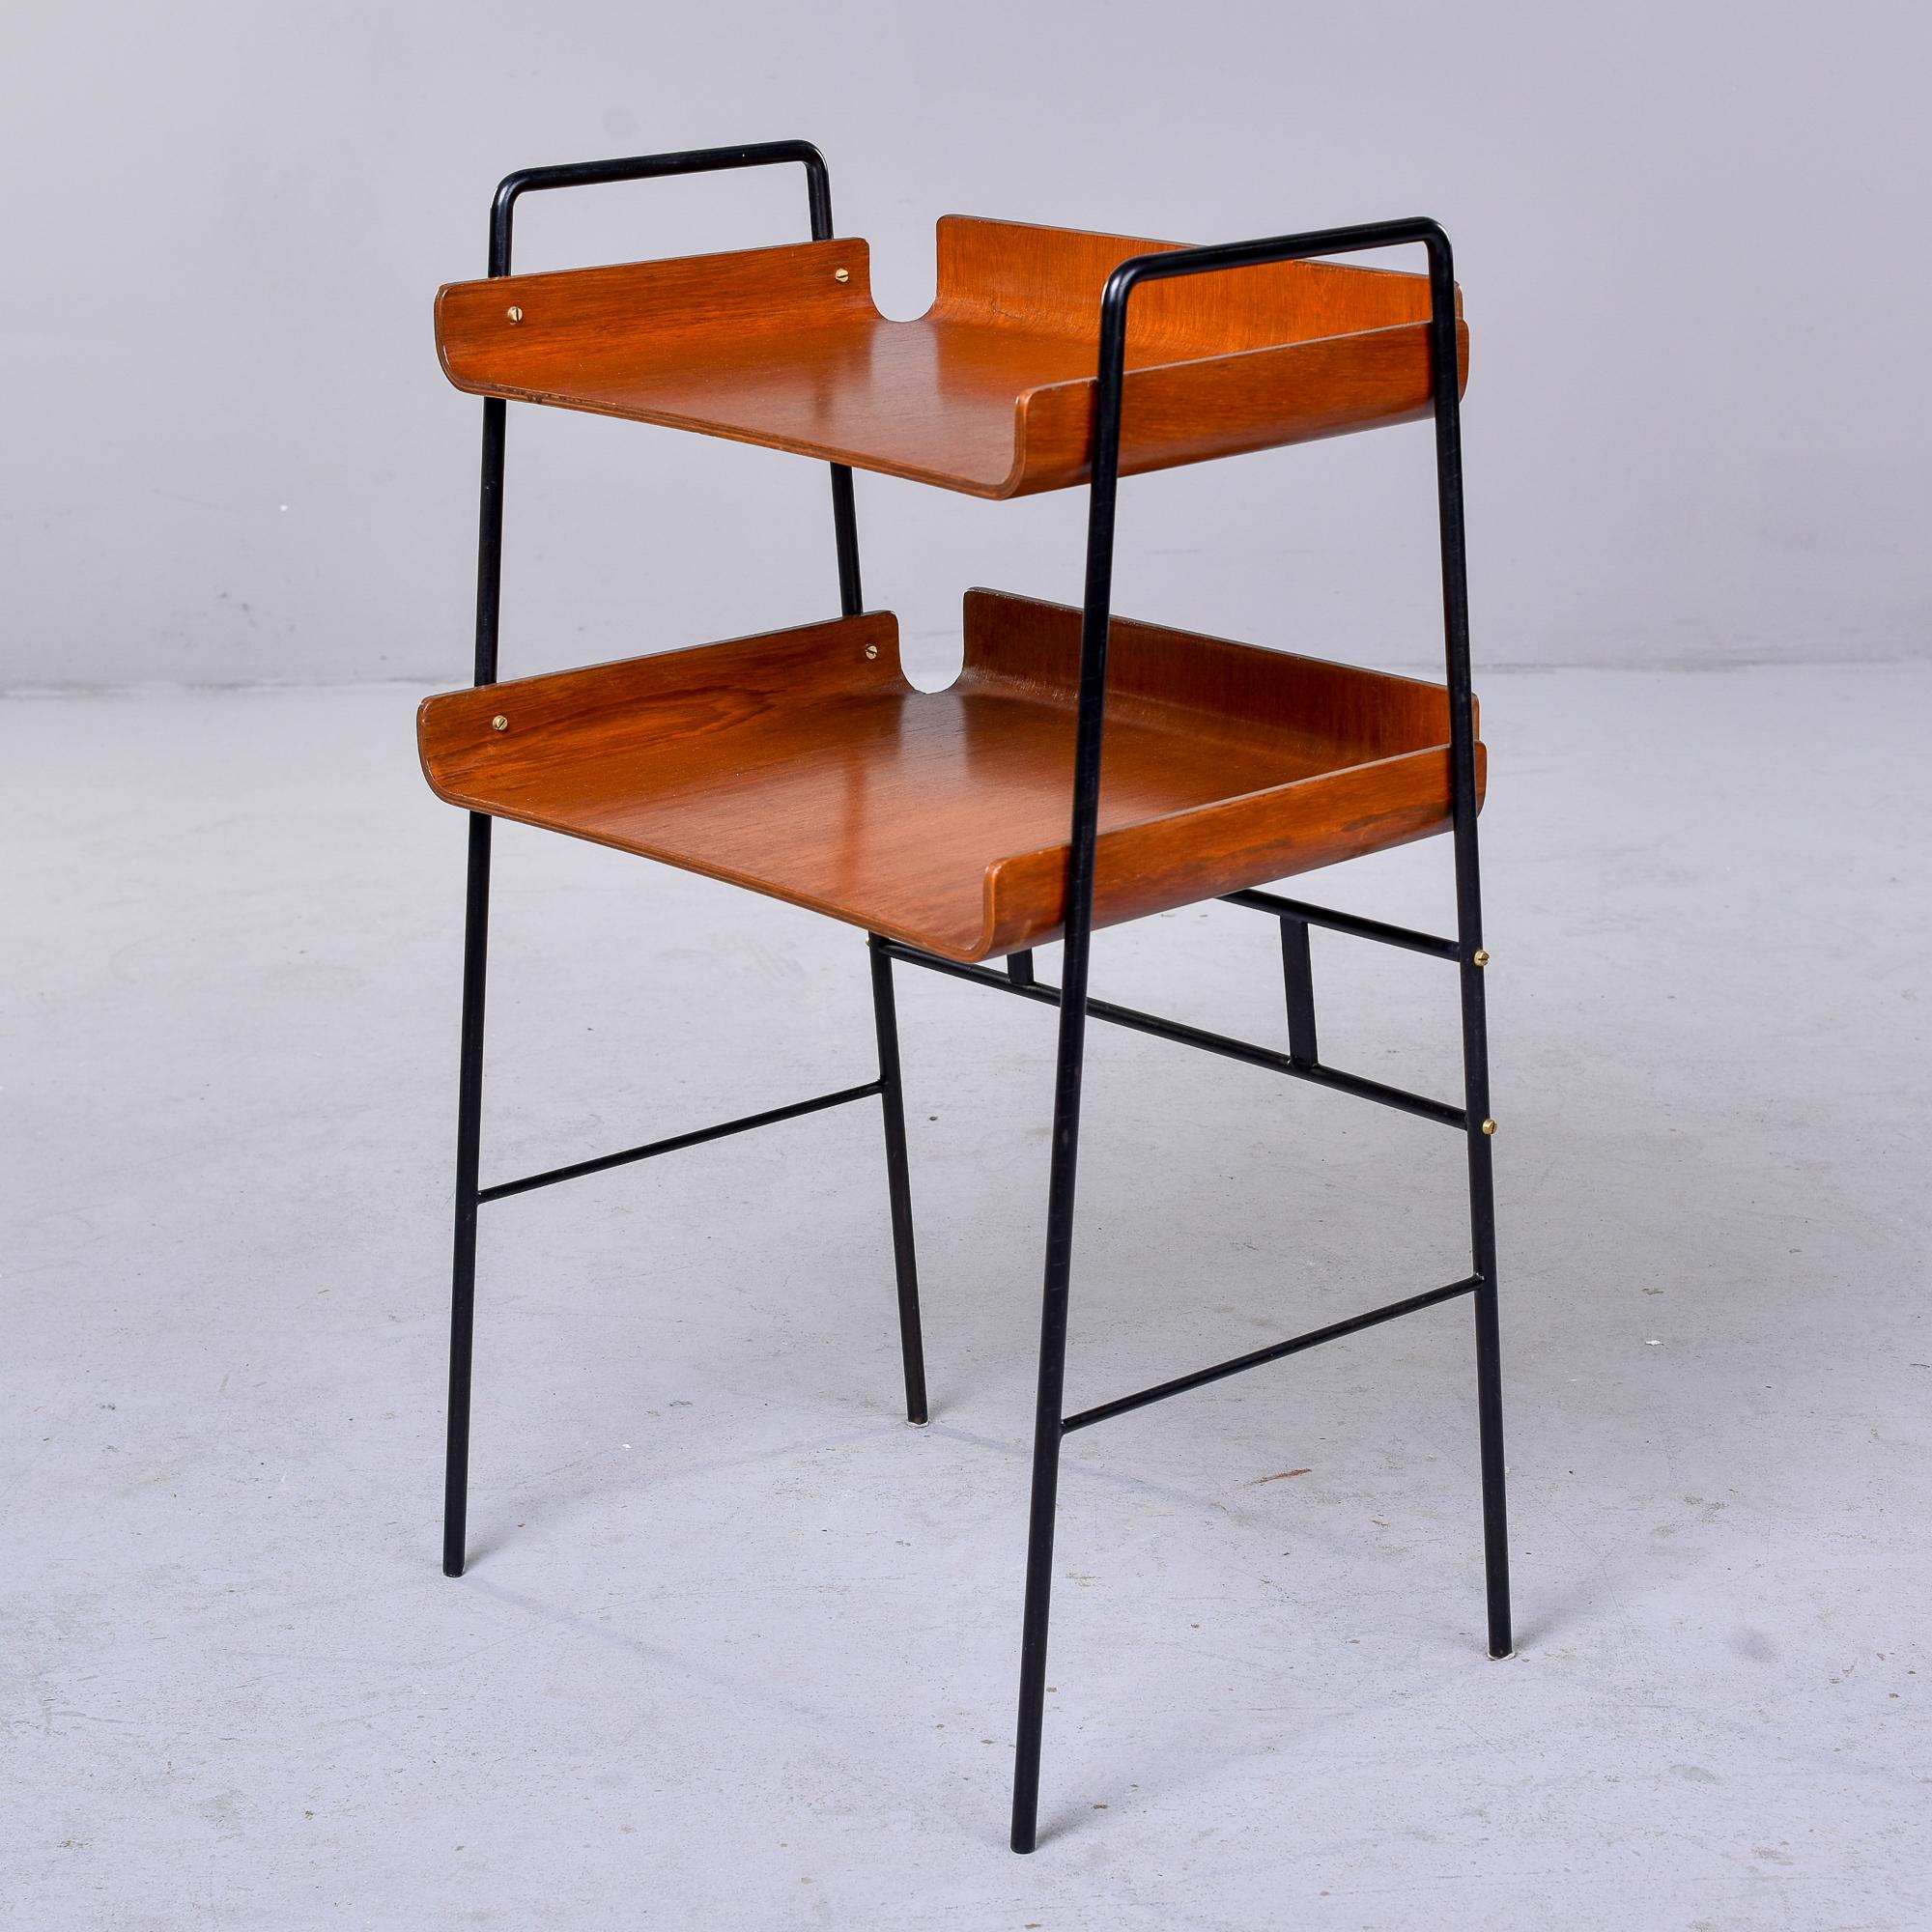 Found in Italy, this two tier wood side table with black iron frame dates from the 1970s. Table has narrow black iron frame with bentwood shelves covered in teak veneer. Unknown maker. Very good vintage condition with minor scattered surface wear.